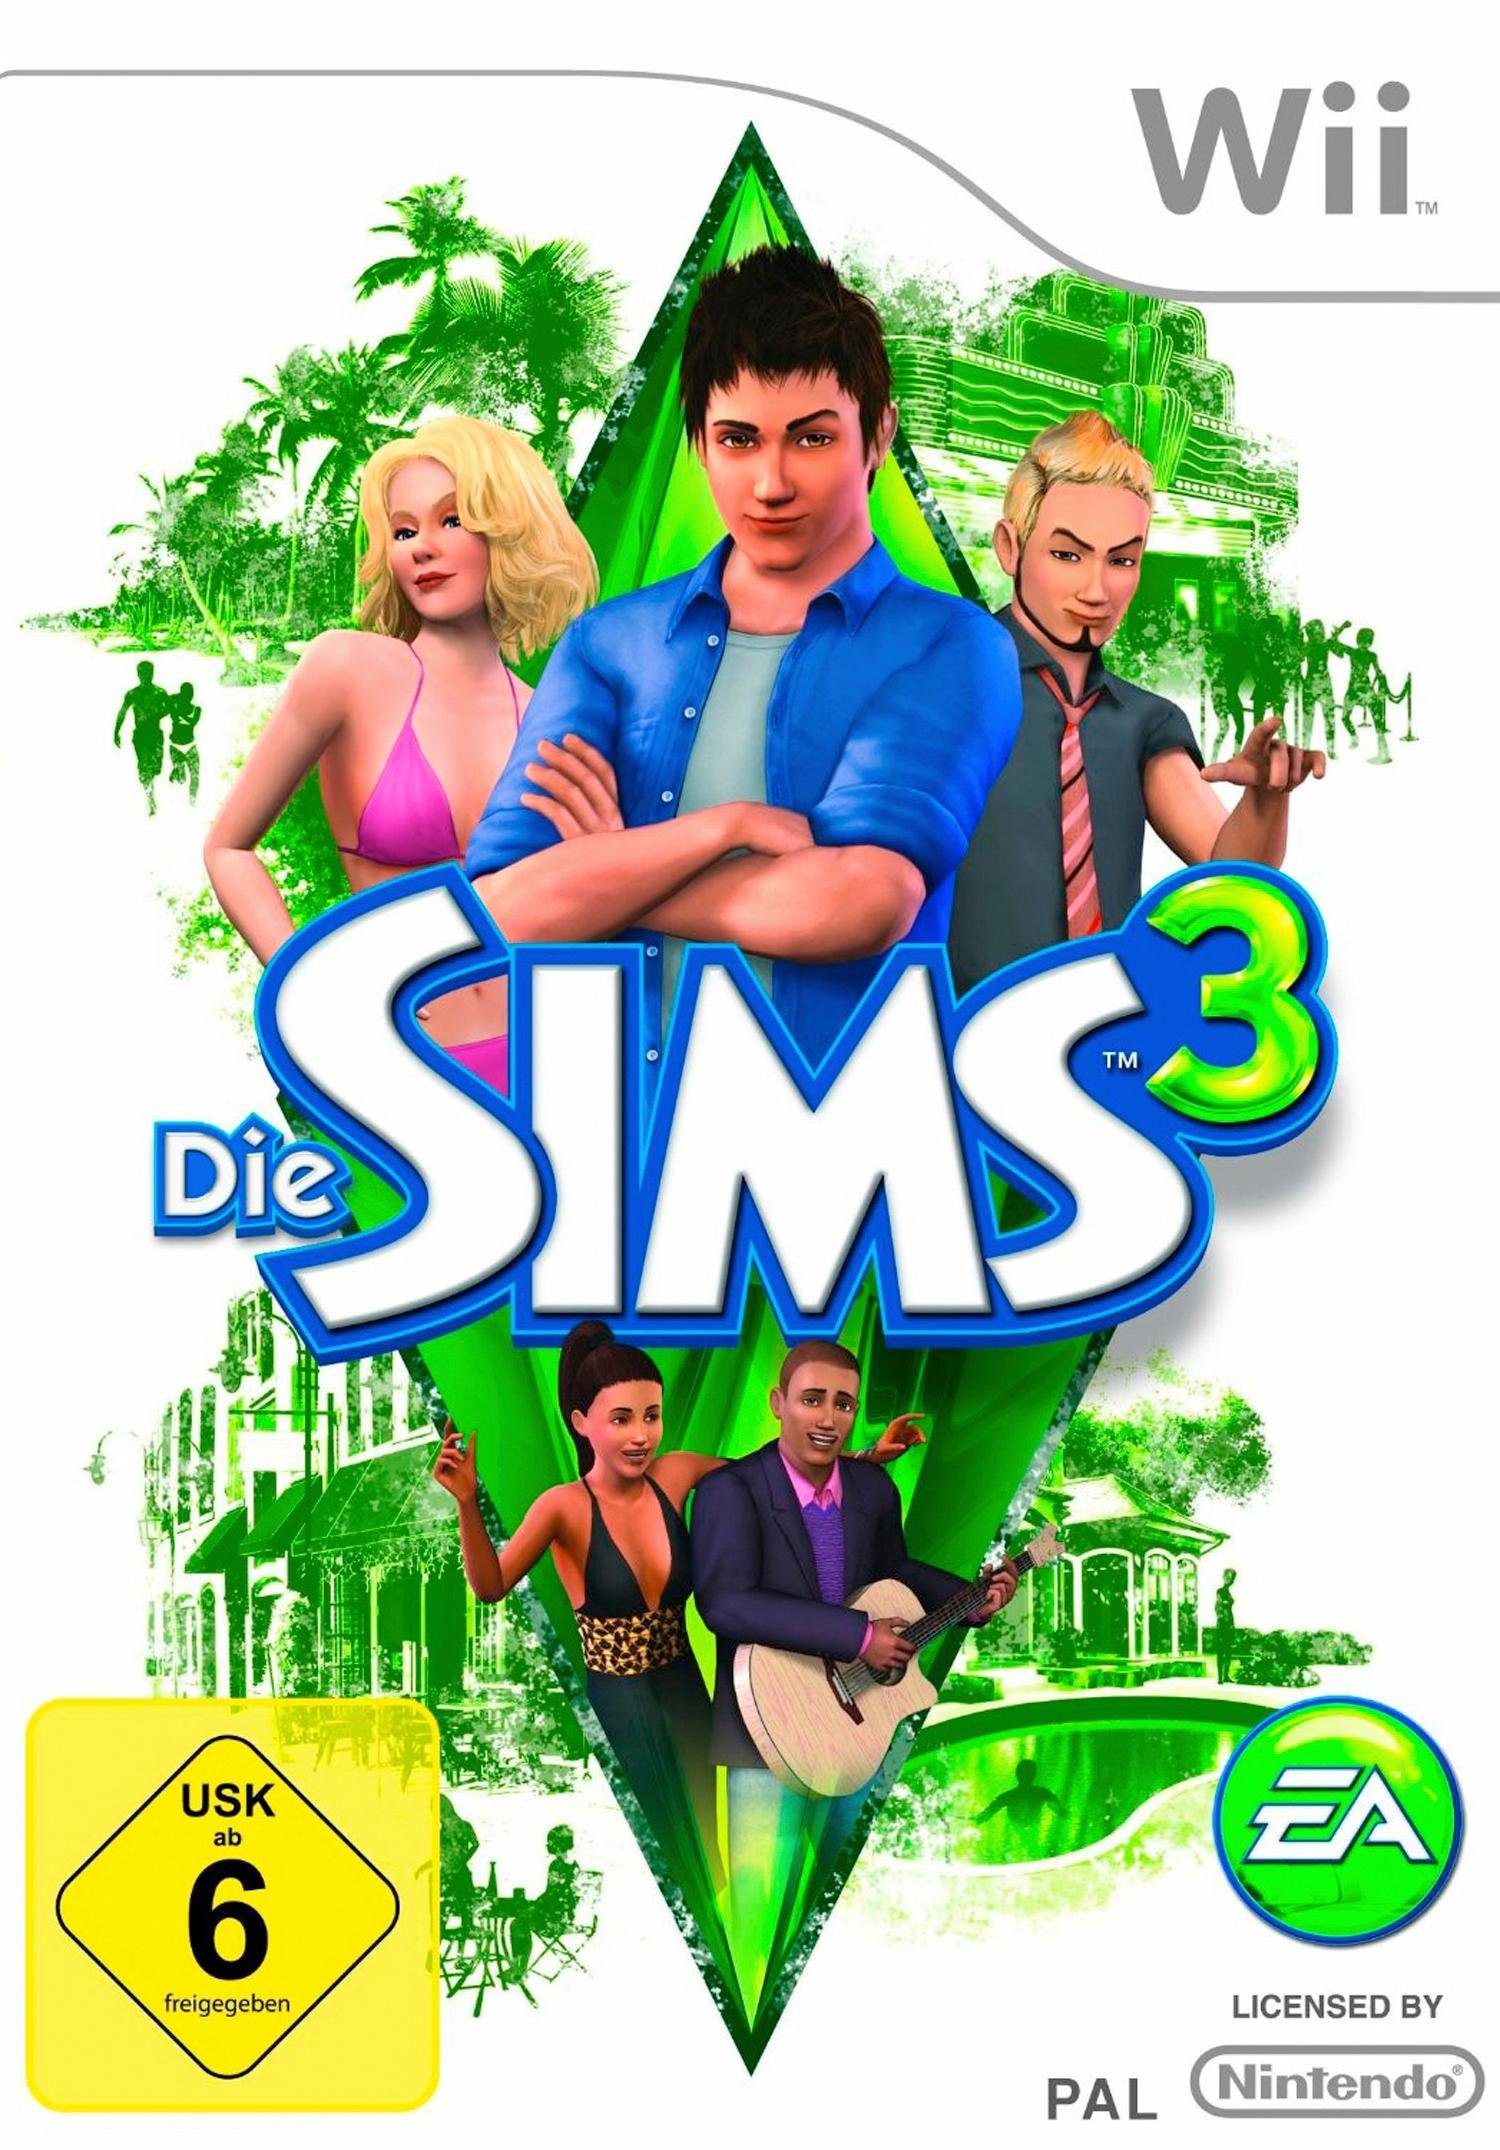 Die Sims 3 Nintendo 3DS, Software Pyramide